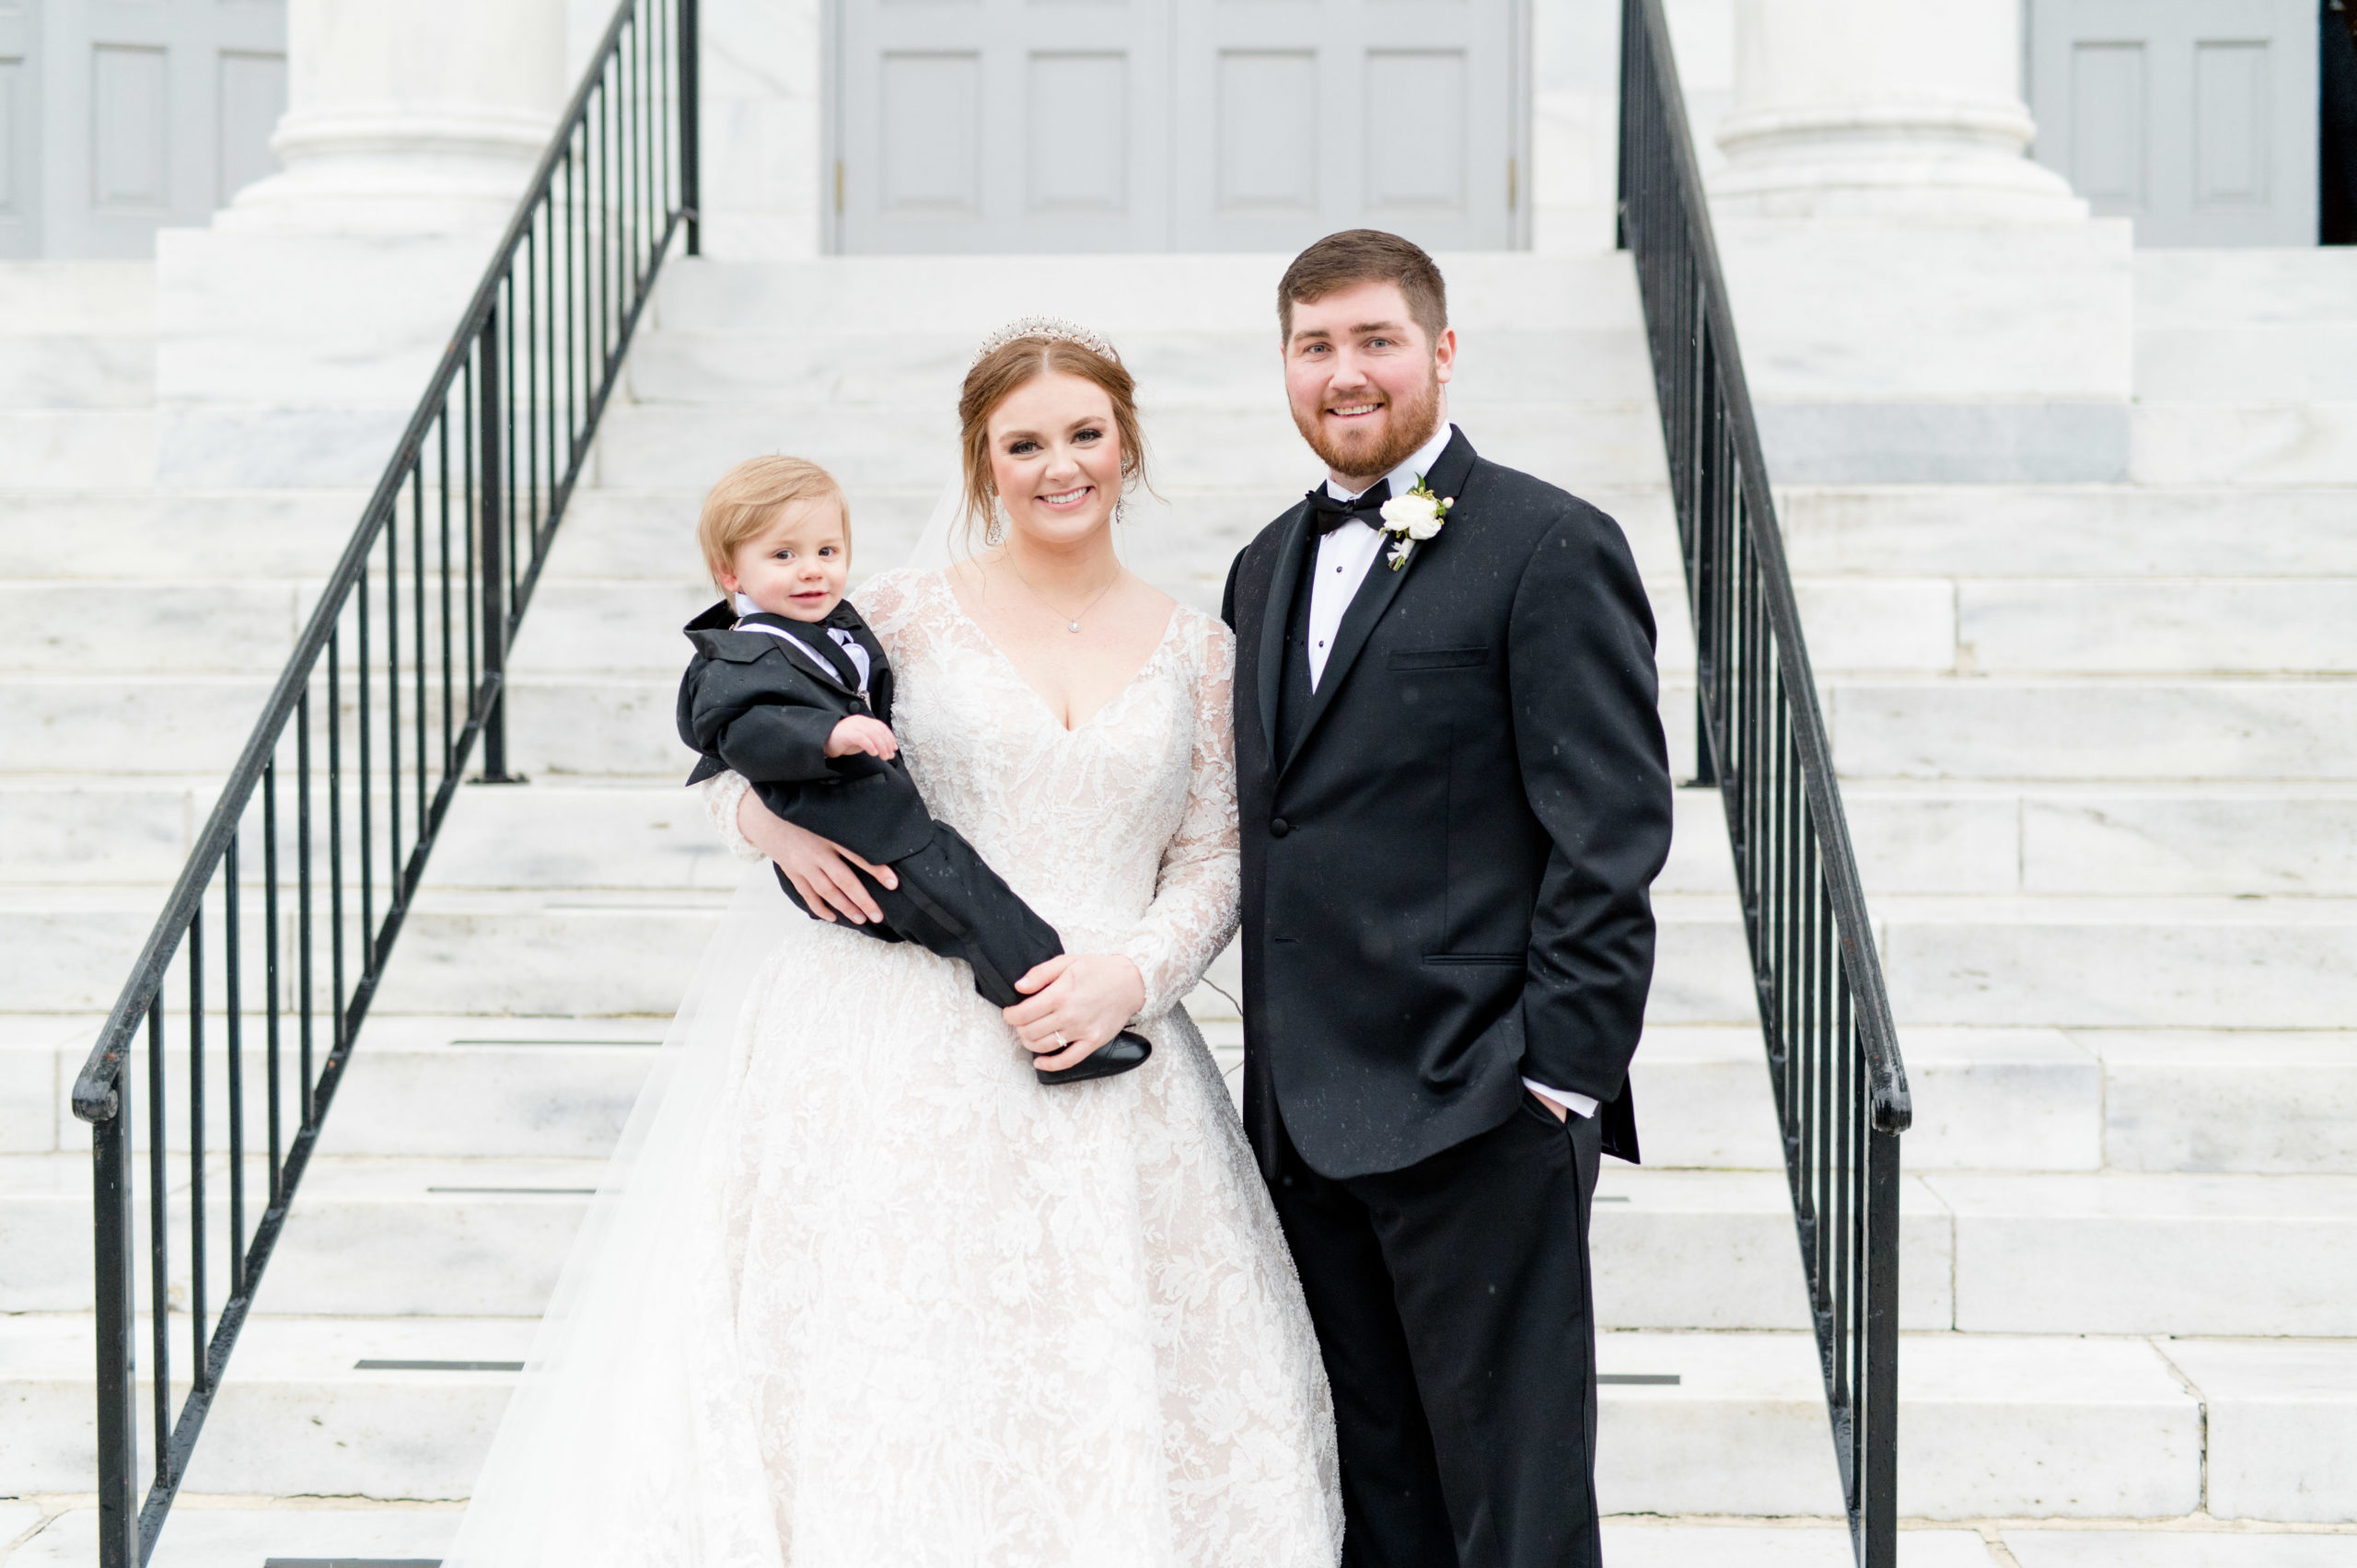 Bride and groom hold son.